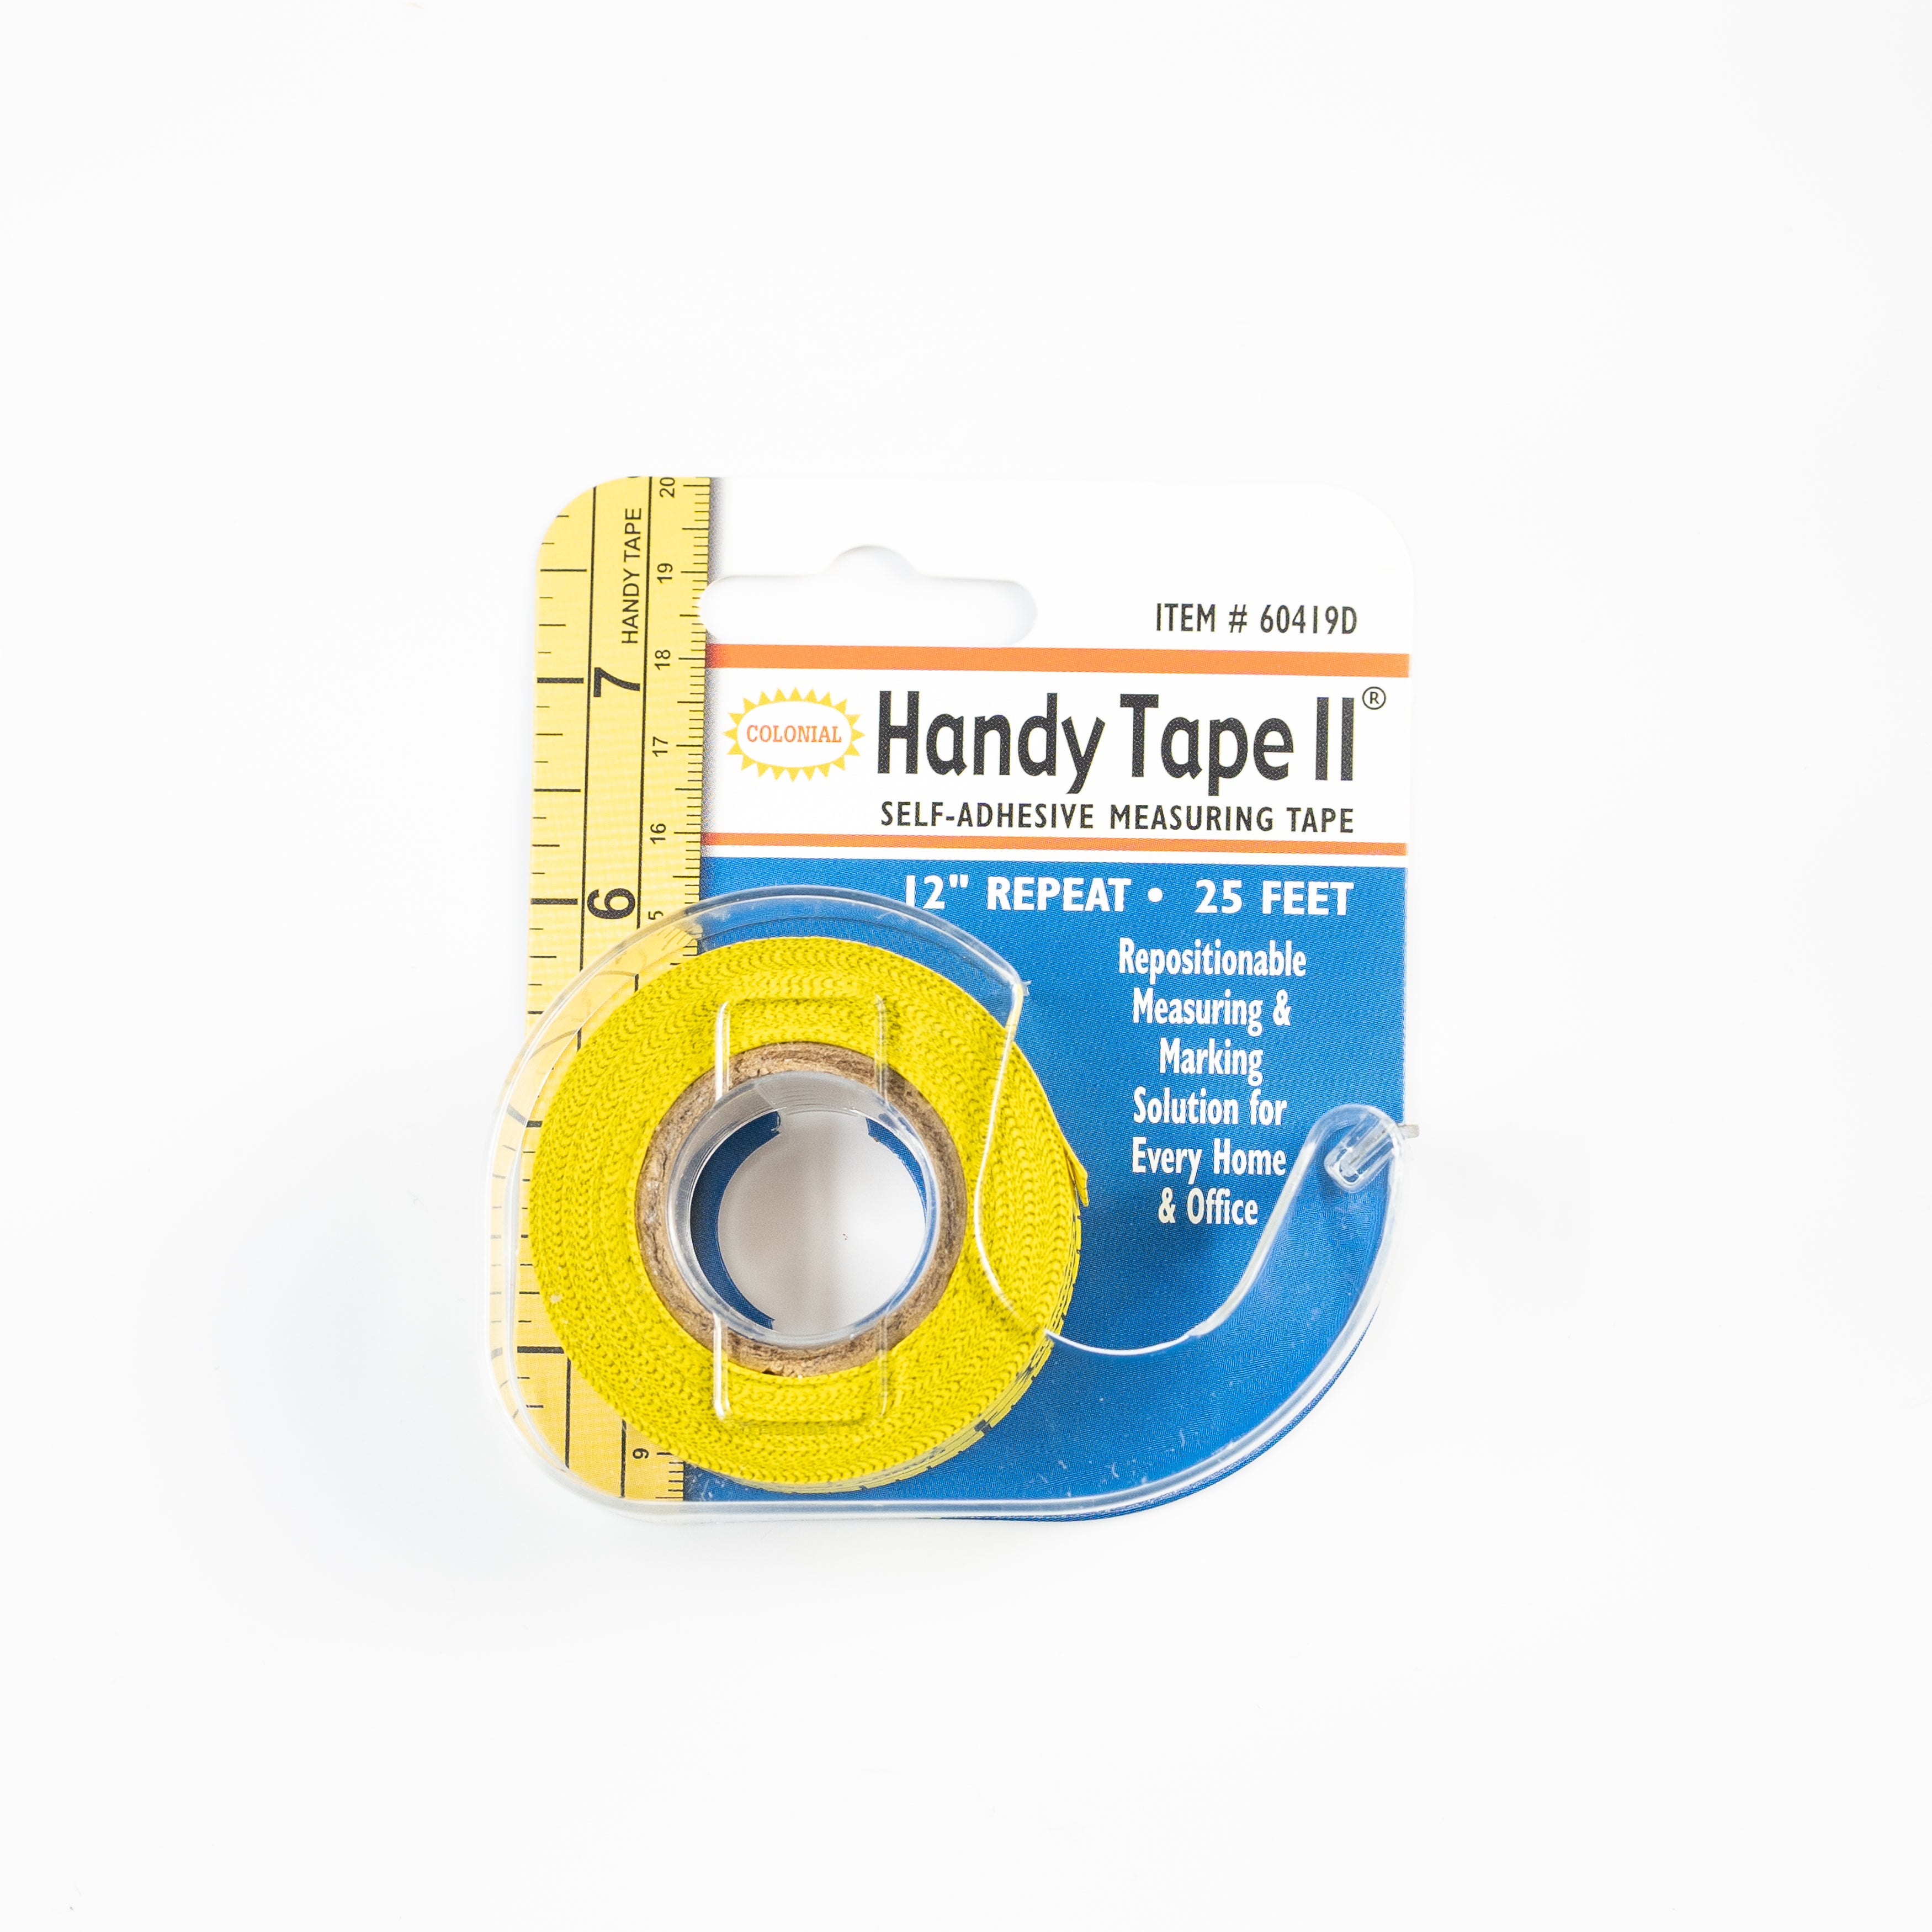 Top Notch 60 Retractable Double Sided Tape Measure - Navy - Quilting Supplies - Sewing Supplies